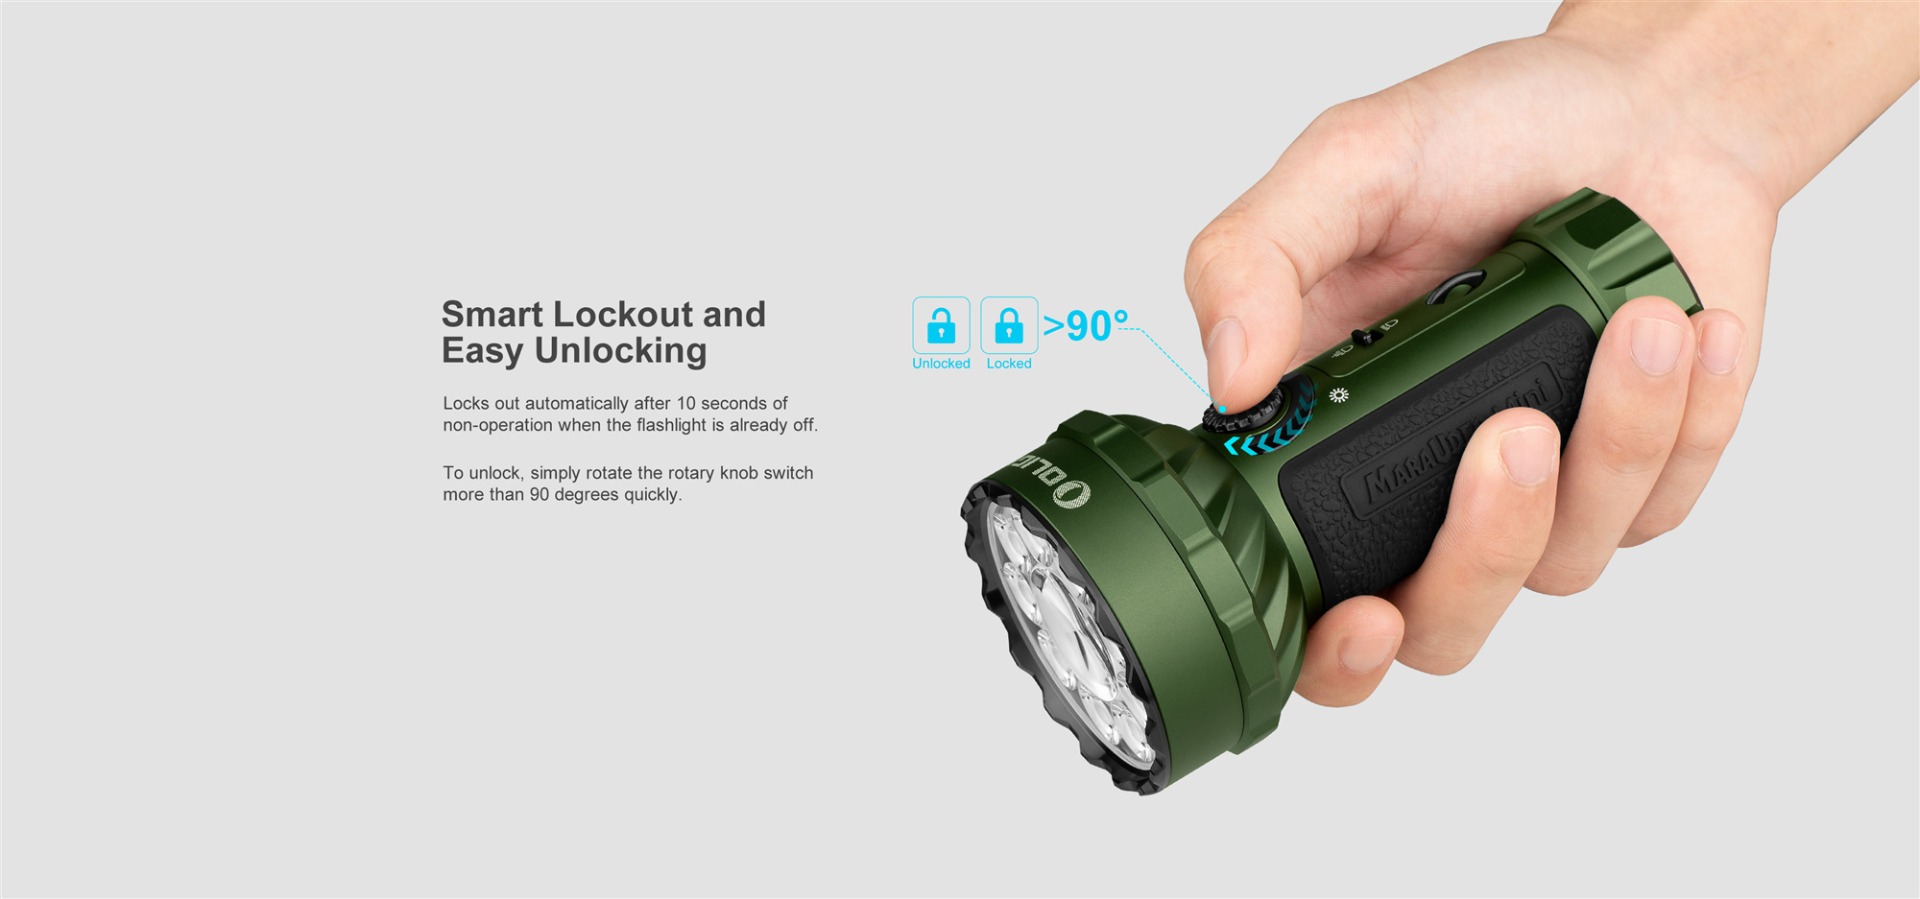 Smart lock out and easy unlocking 